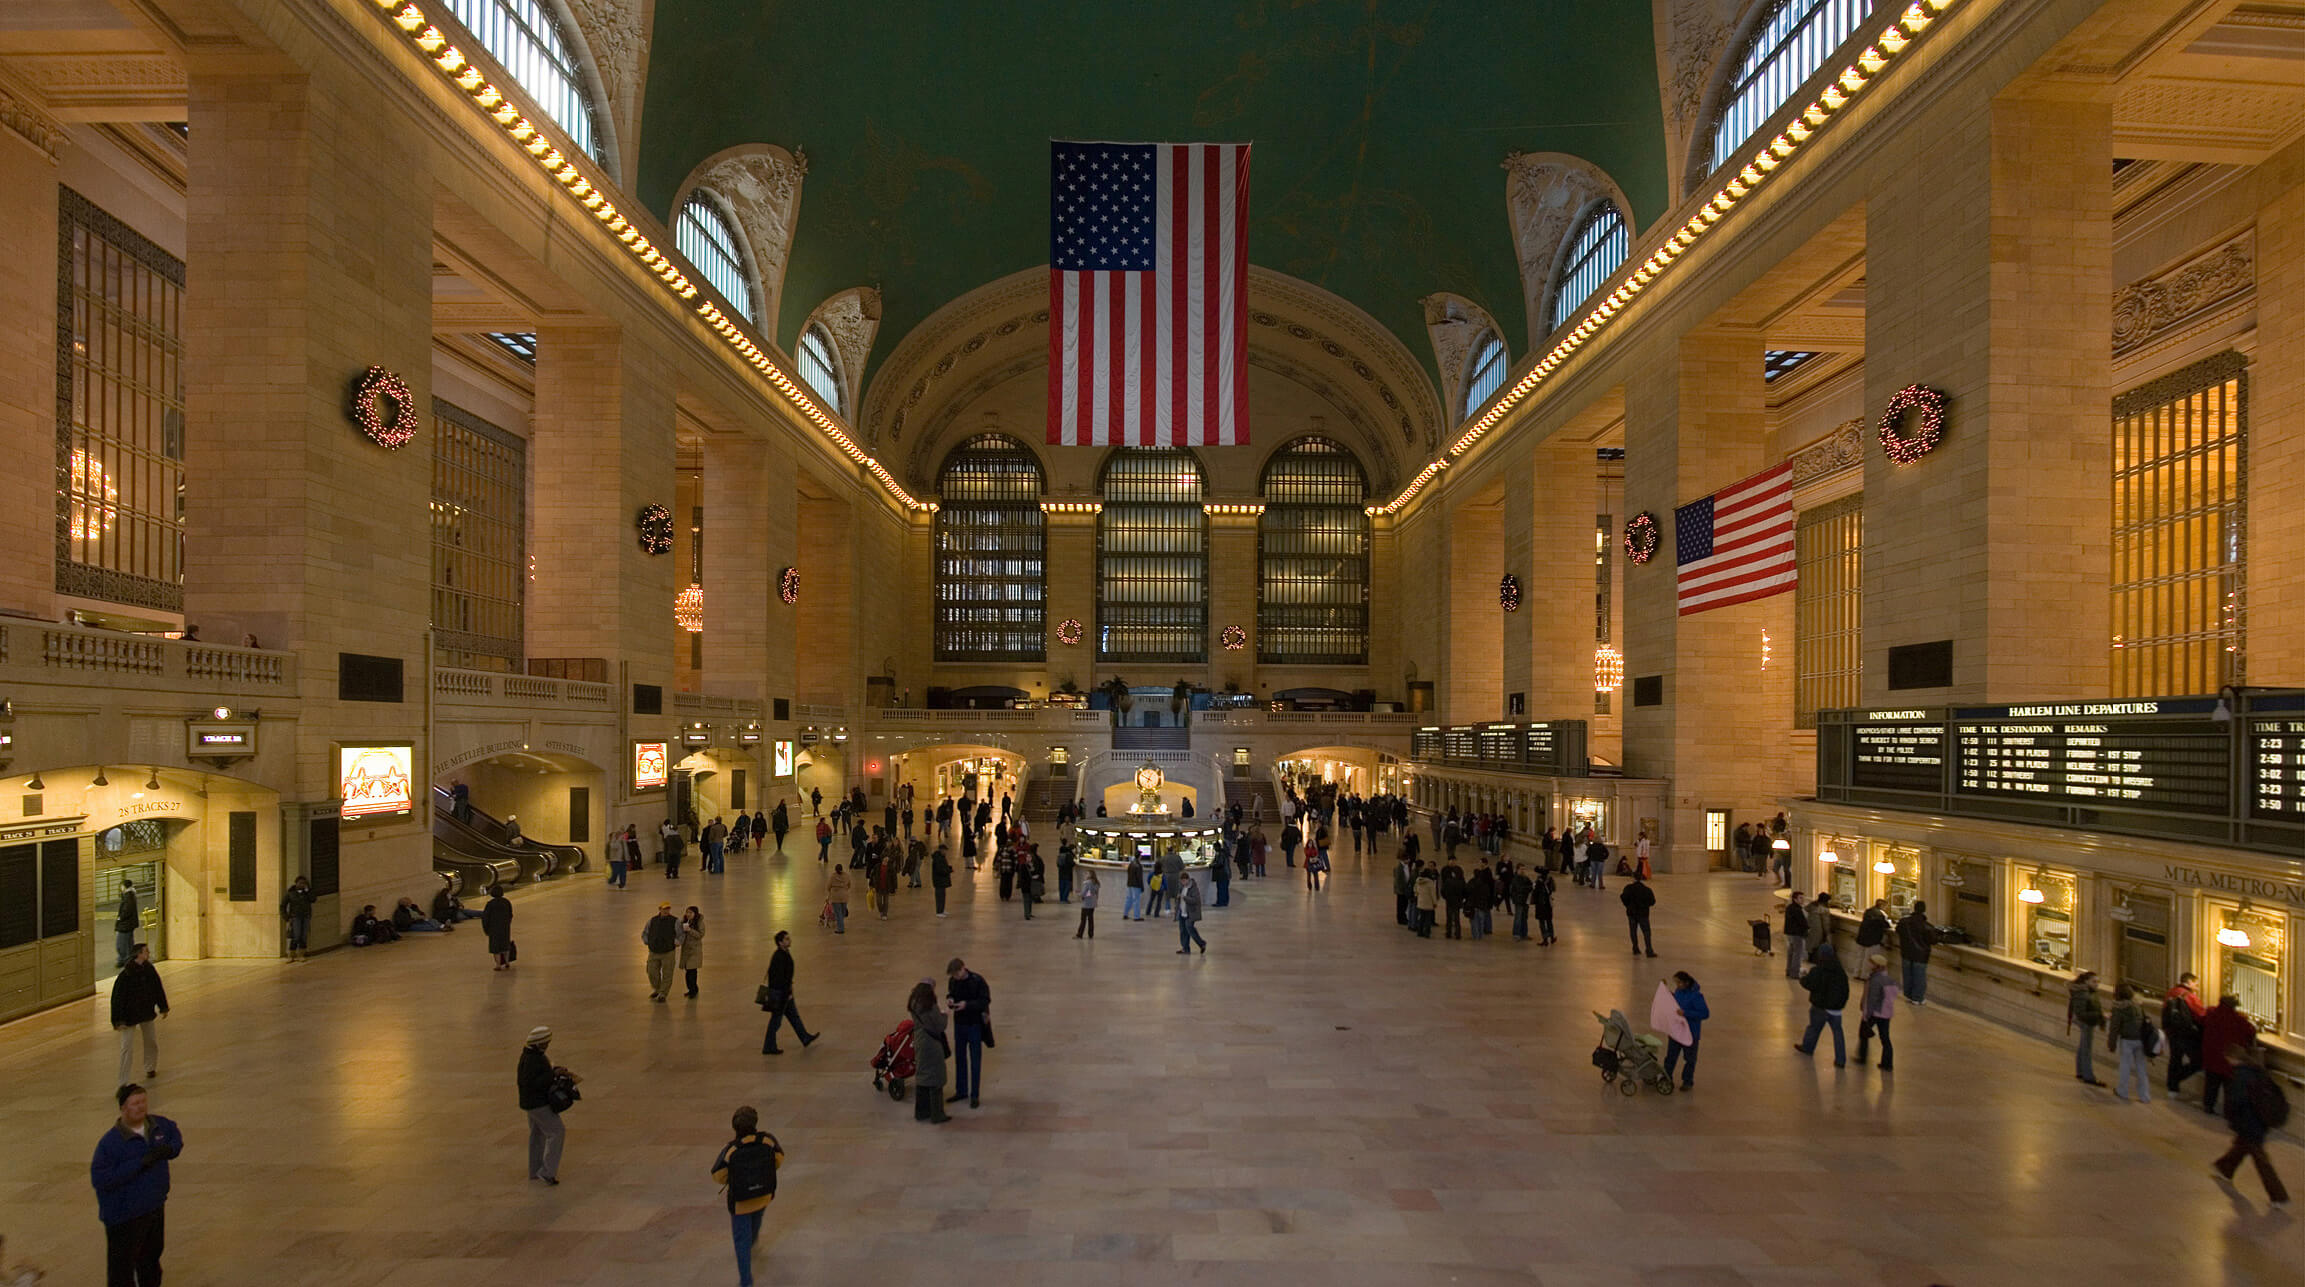 Illuminating Grand Central and Its 'Untold Secrets' - The Lighting Practice